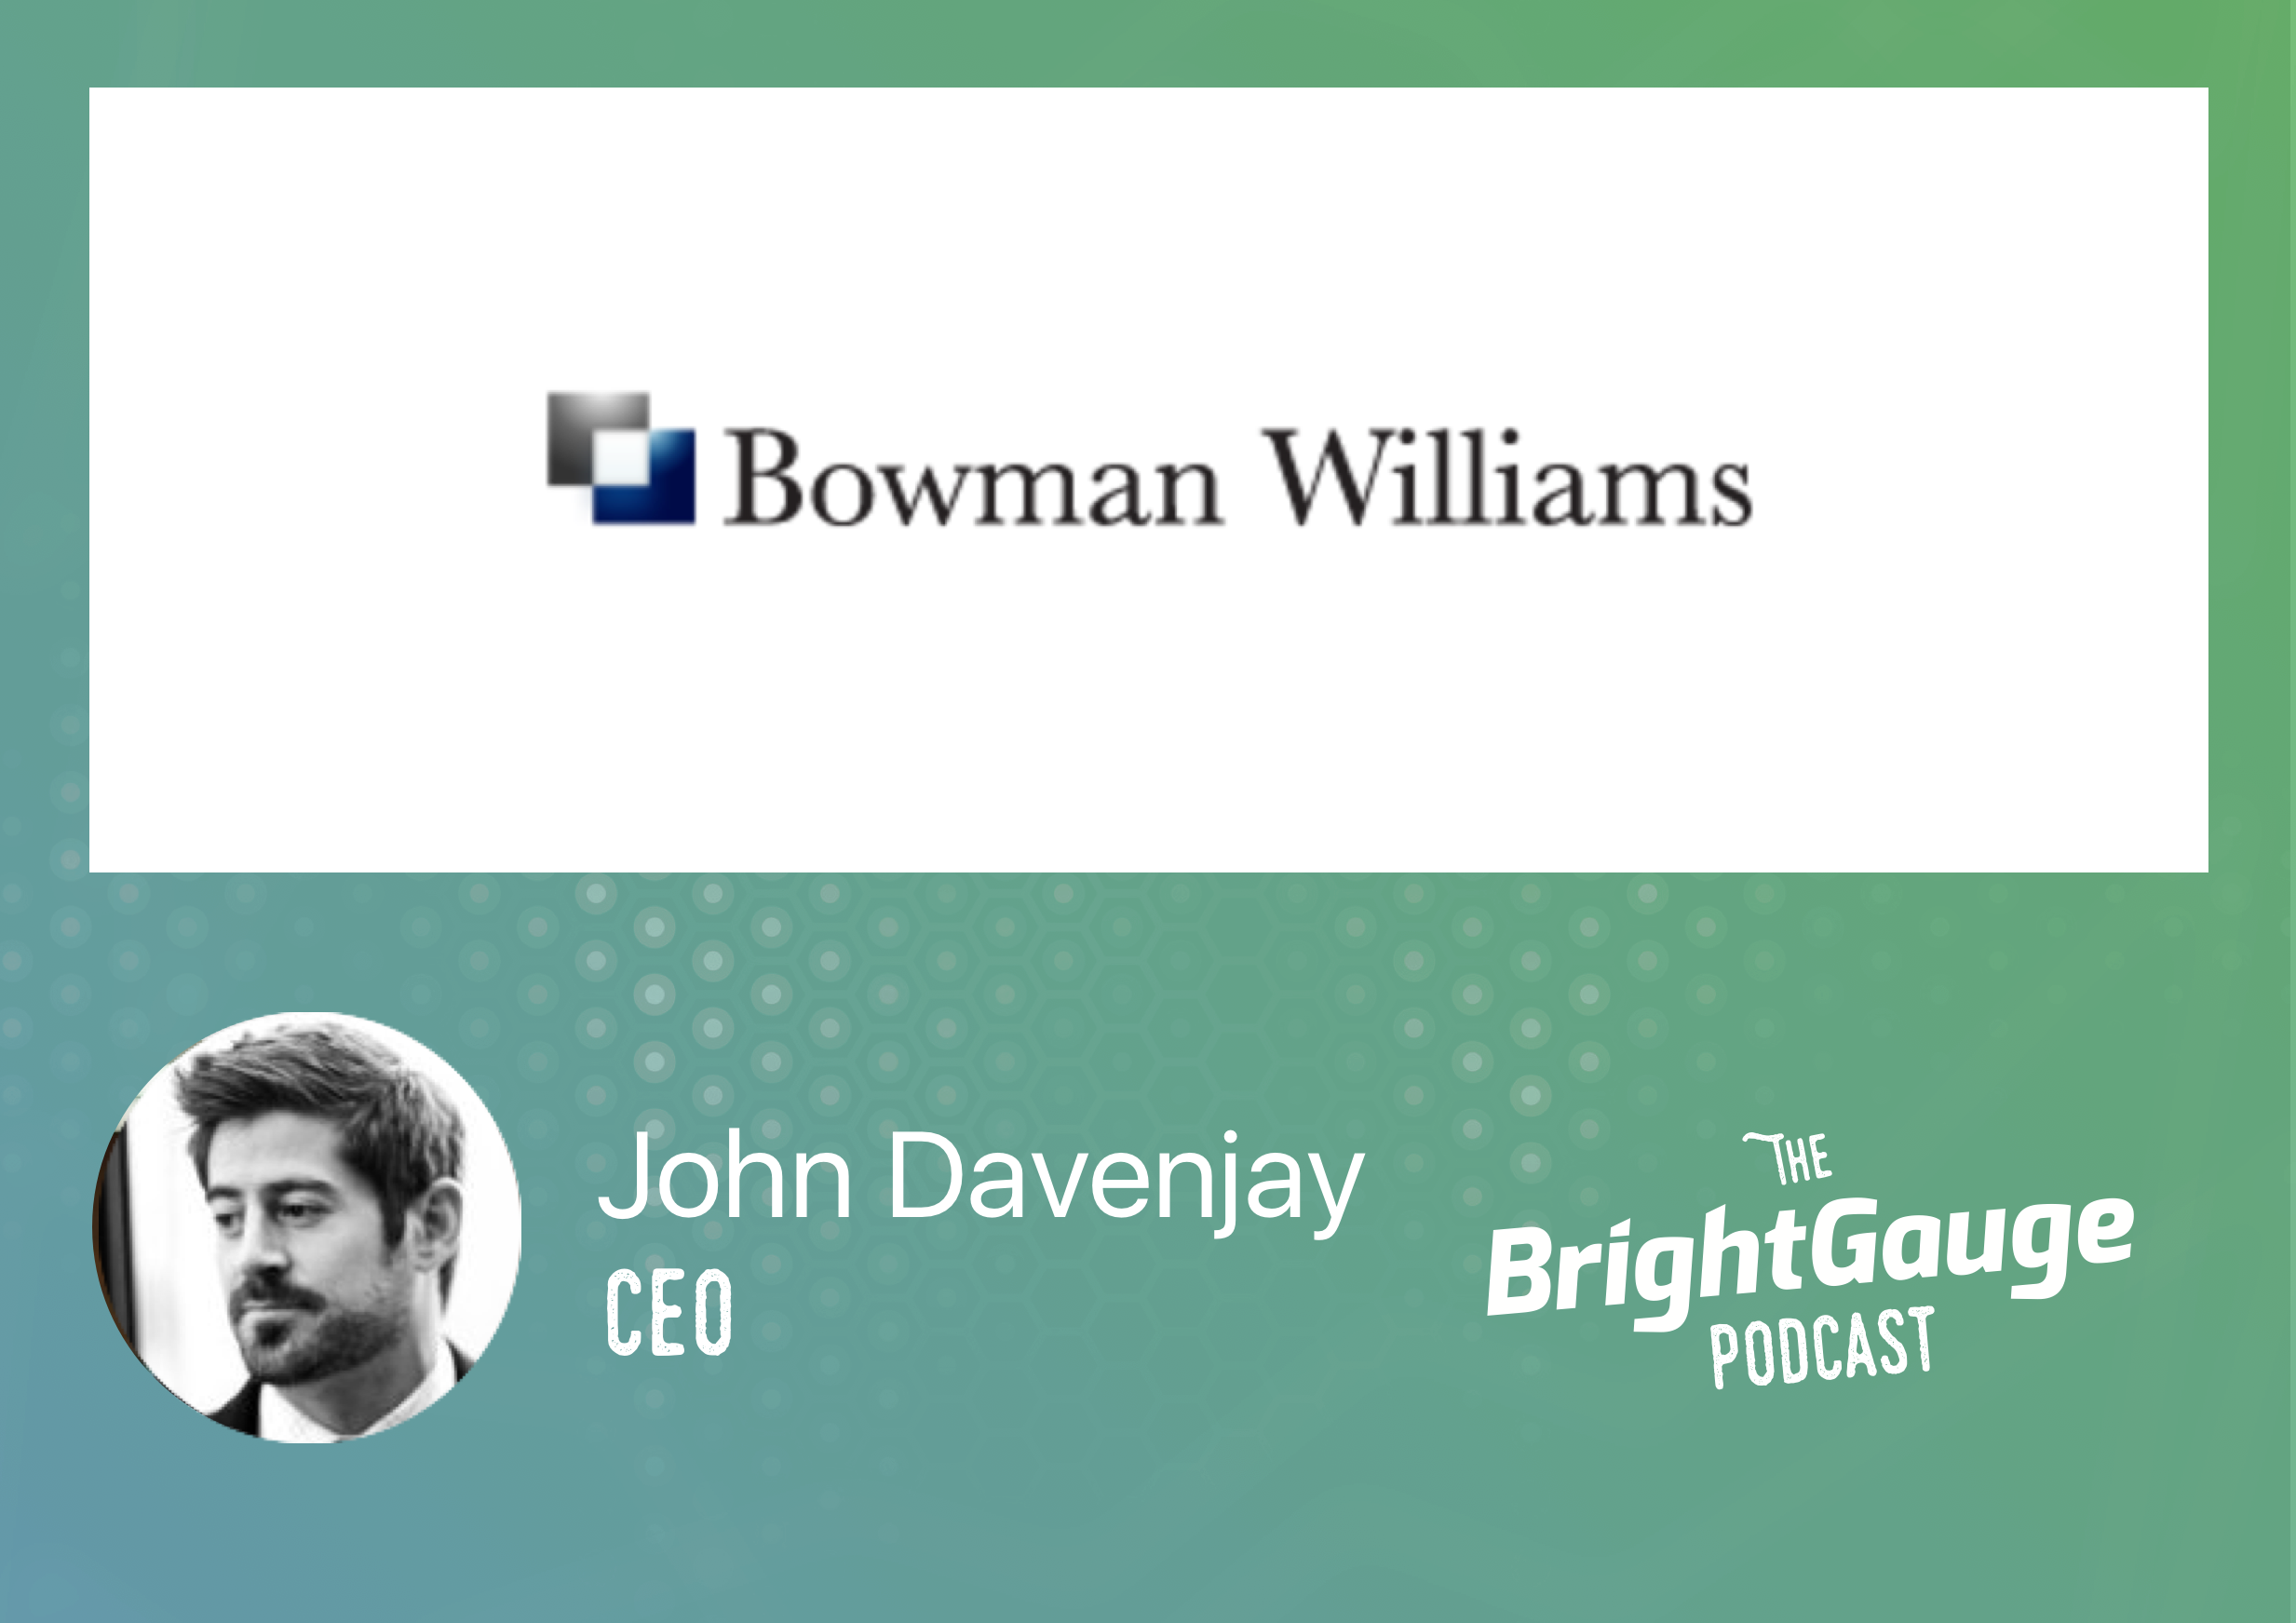 [Podcast] Episode 33 with John Davenjay of Bowman Williams